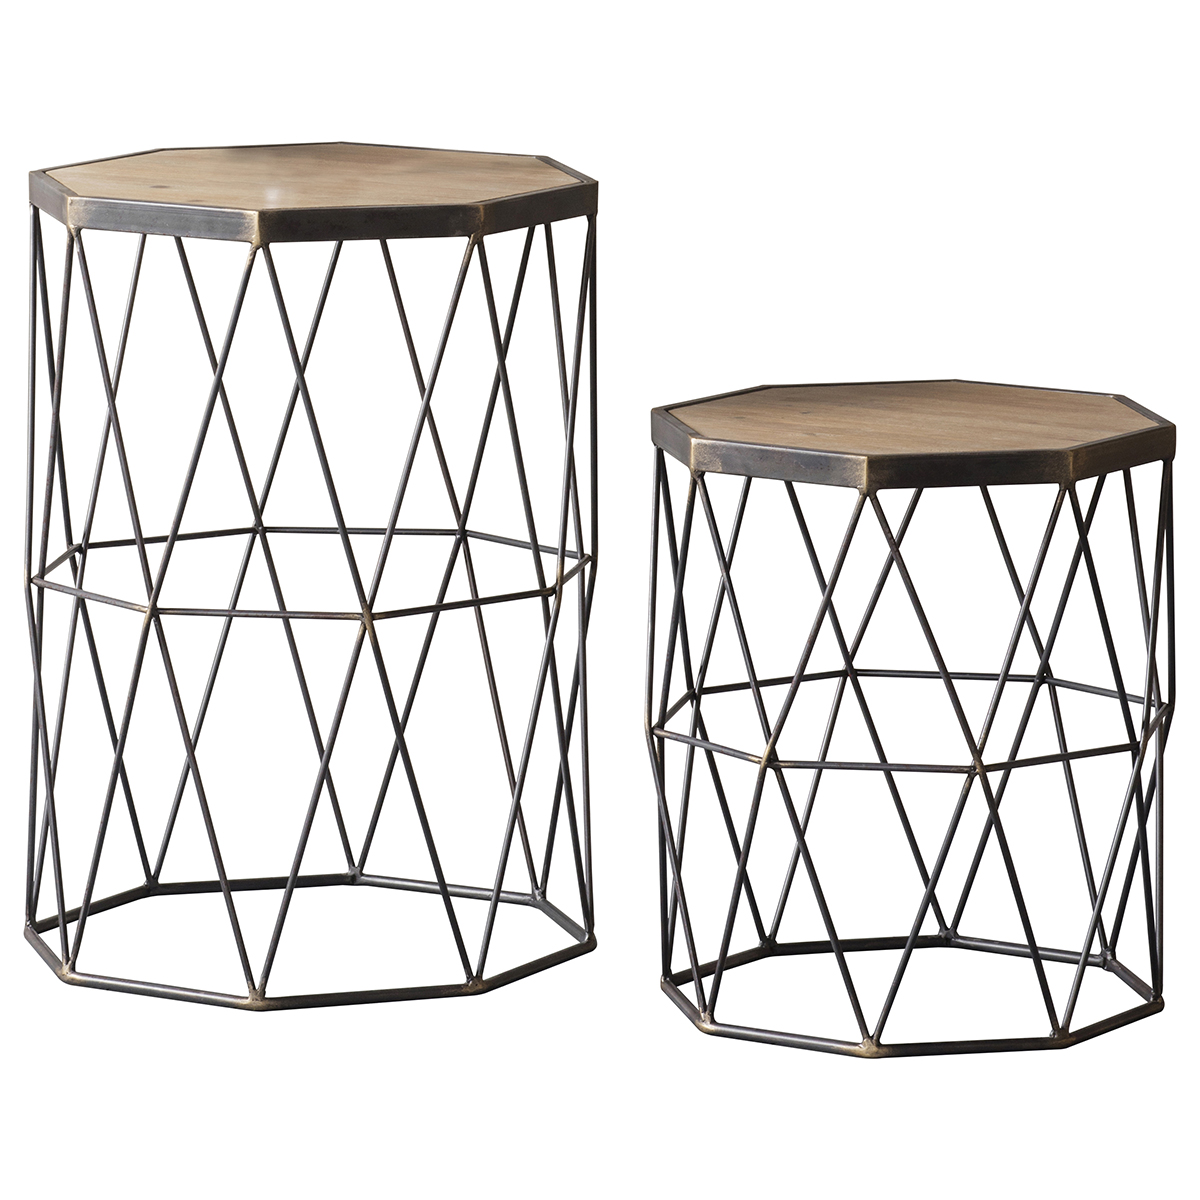 Gallery Direct Marshal Side Table  (Set of 2)